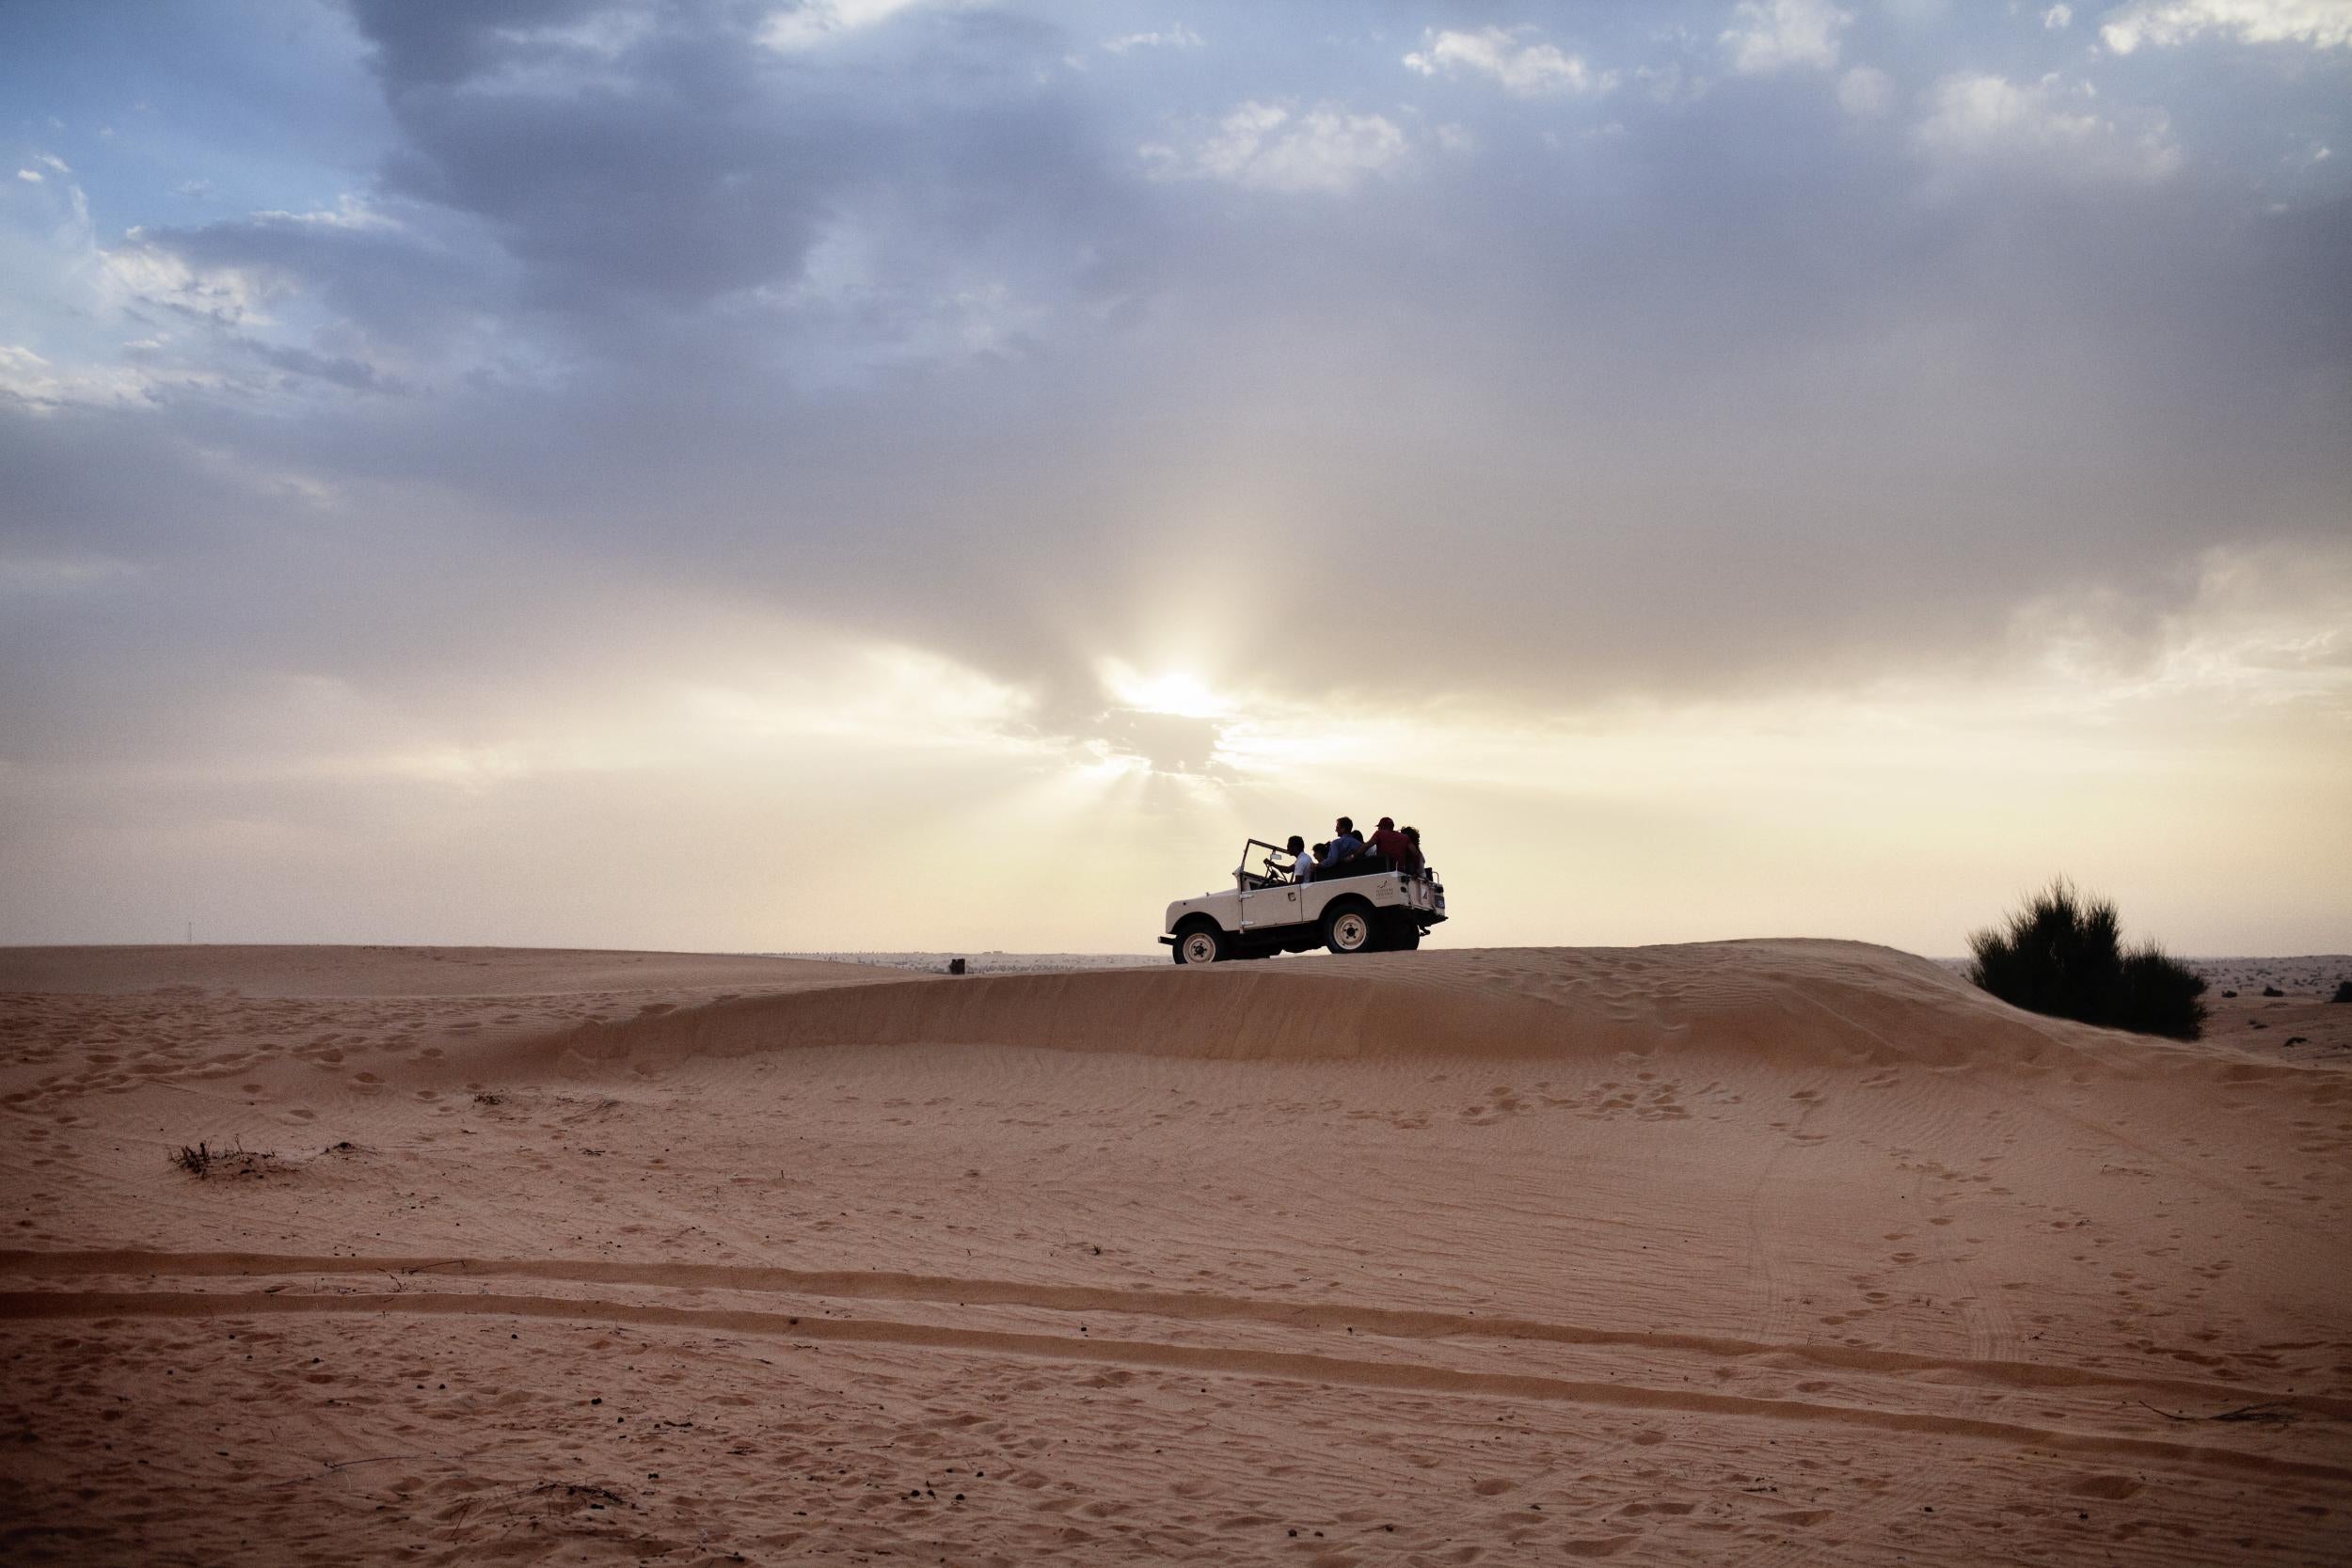 Fancy a spot of dune bashing in Dubai? There are plenty of them